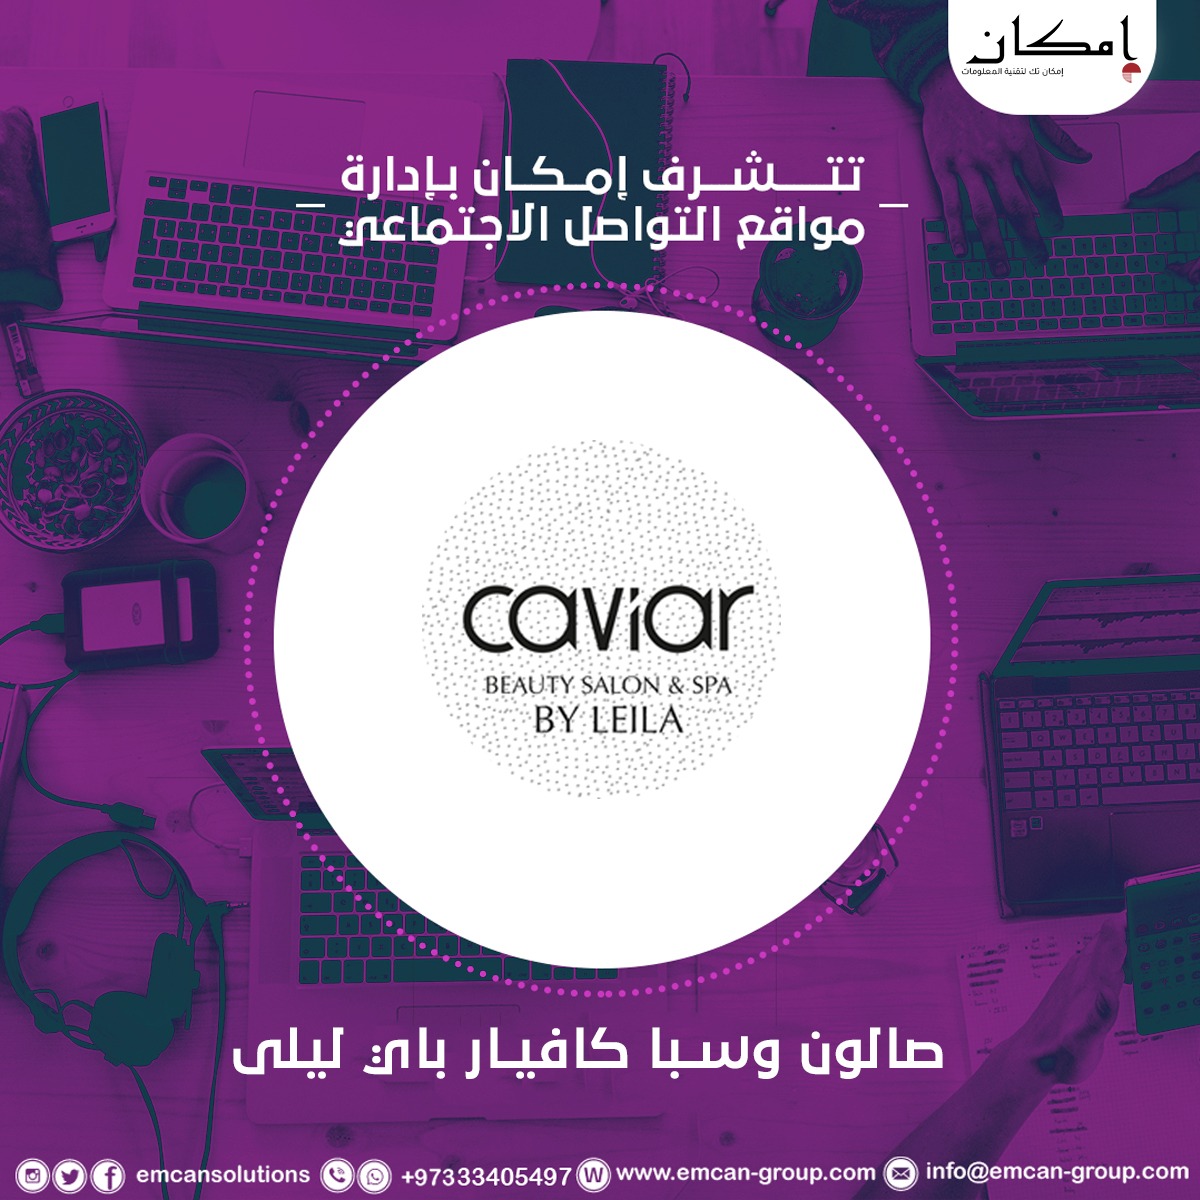 Social media management for Caviar By Laila Salon and Spa